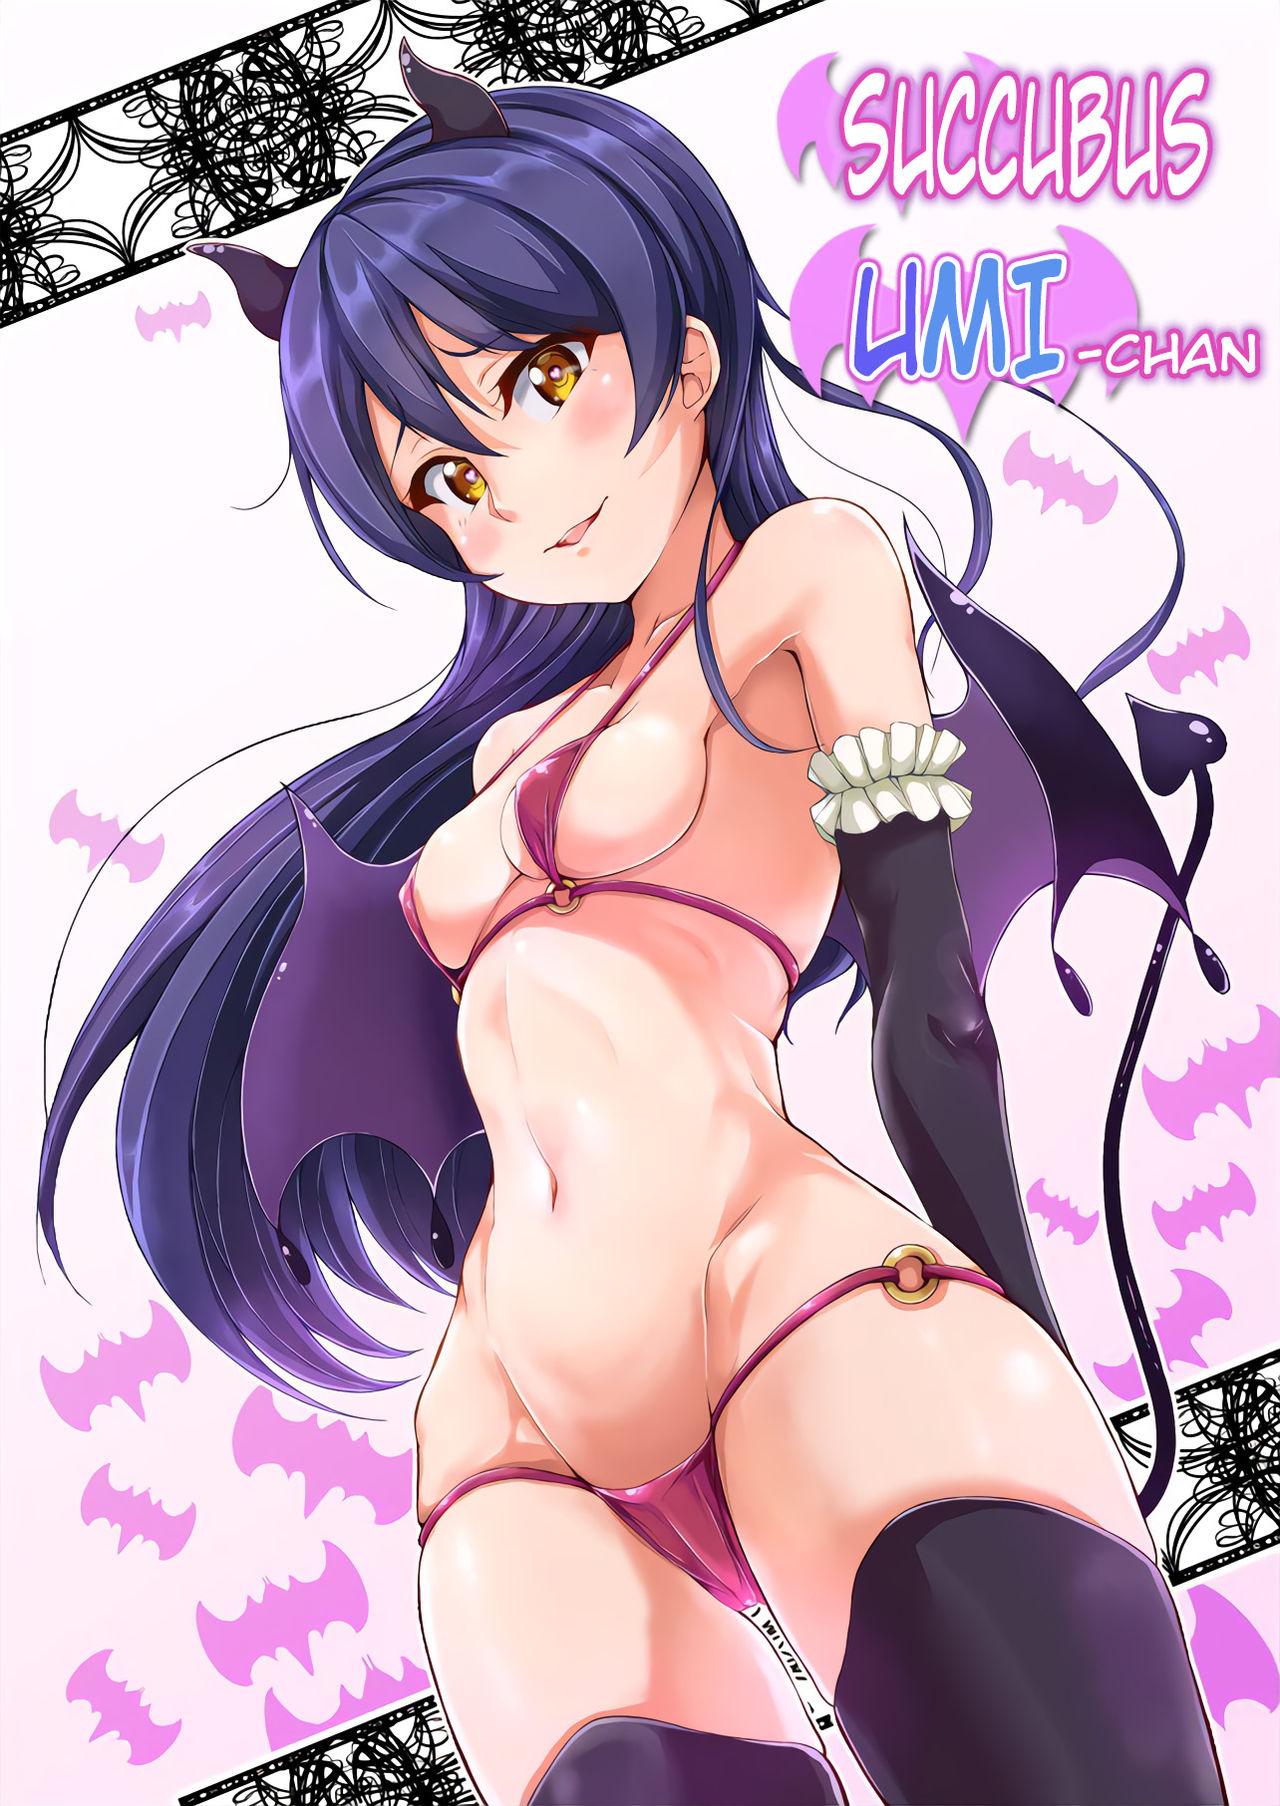 Blowjob Succubus Umi-chan - Love live Collar - Page 1